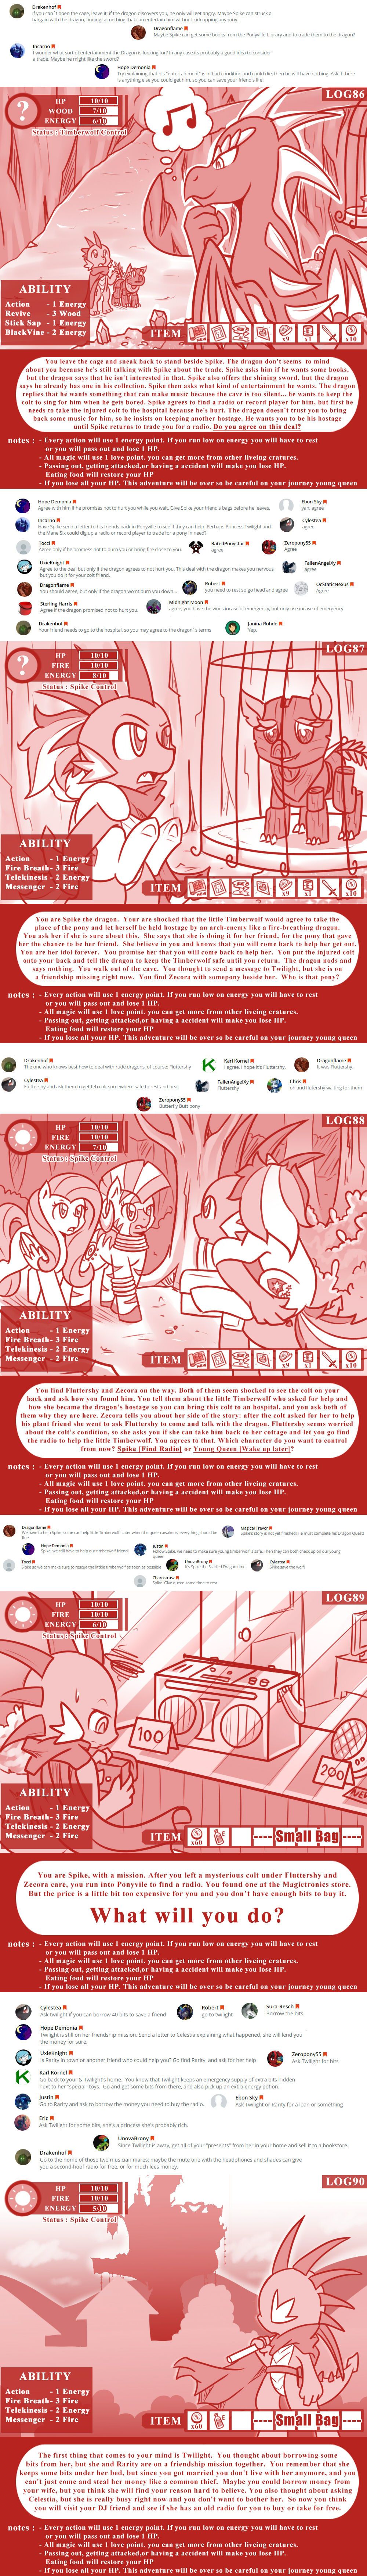 [Vavacung] The Adventure Logs Of Young Queen (My Little Pony Friendship is Magic) [Updated] [Ongoing] 20